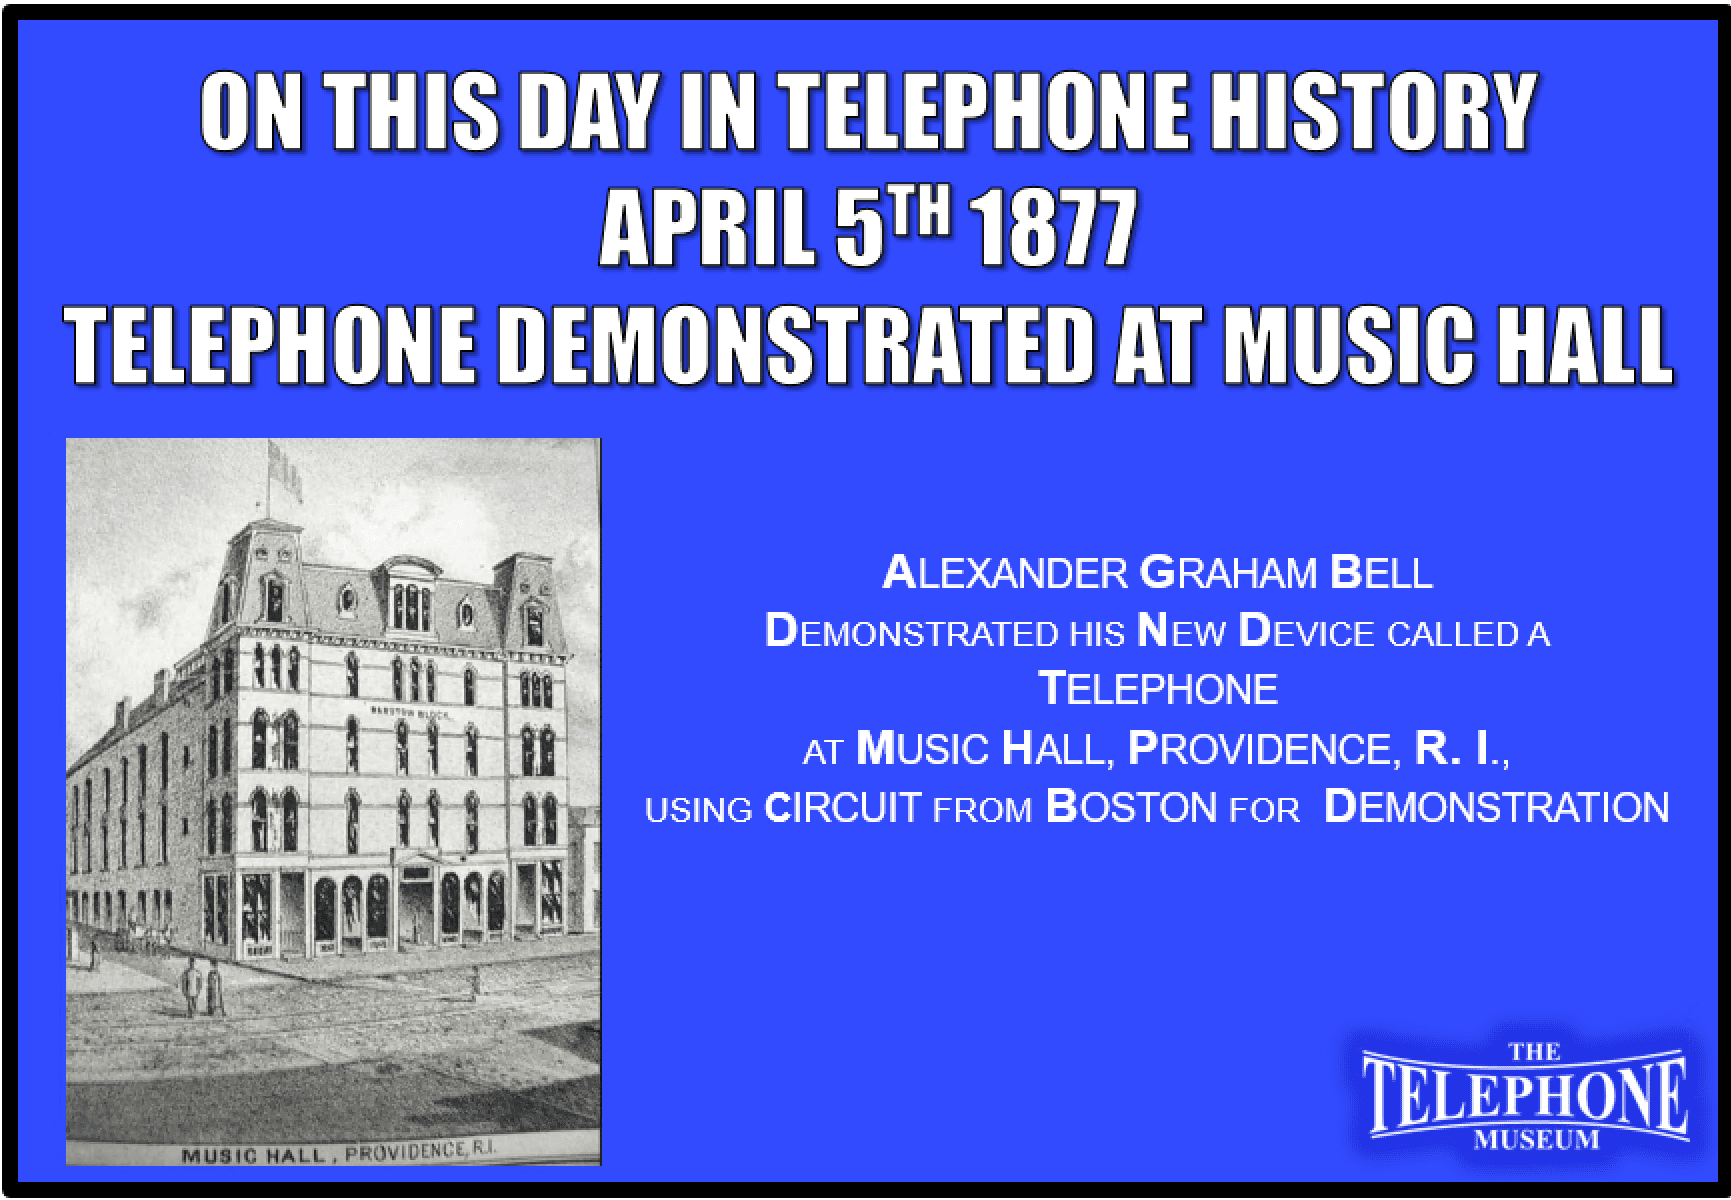 On This Day in Telephone History April 5TH 1877 Alexander Graham Bell demonstrated his new device called a Telephone at Music Hall, Providence, RI, using circuit from Boston for demonstration.